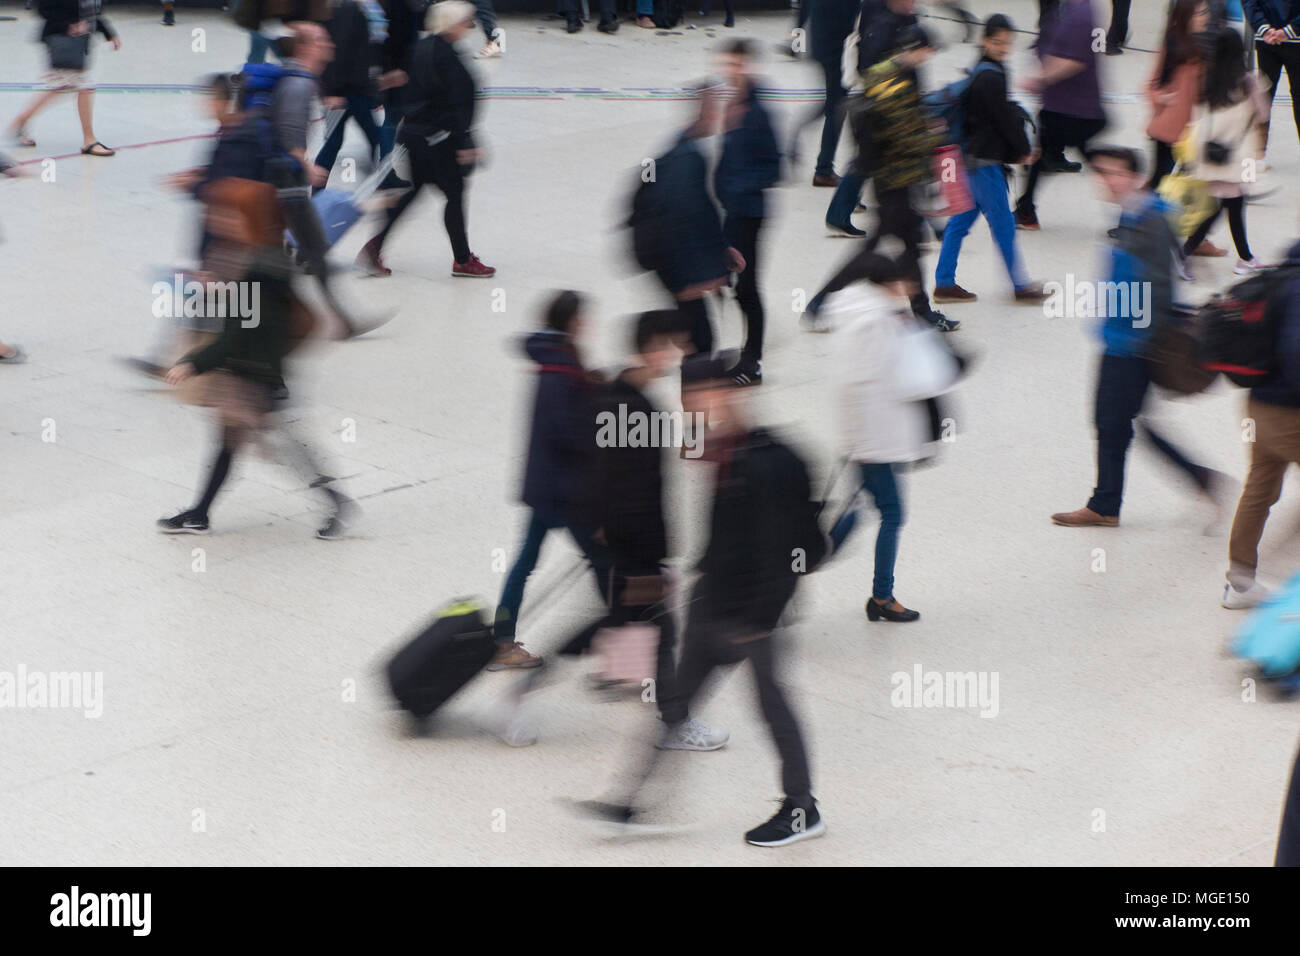 Blurred figures rushing to catch a train Stock Photo